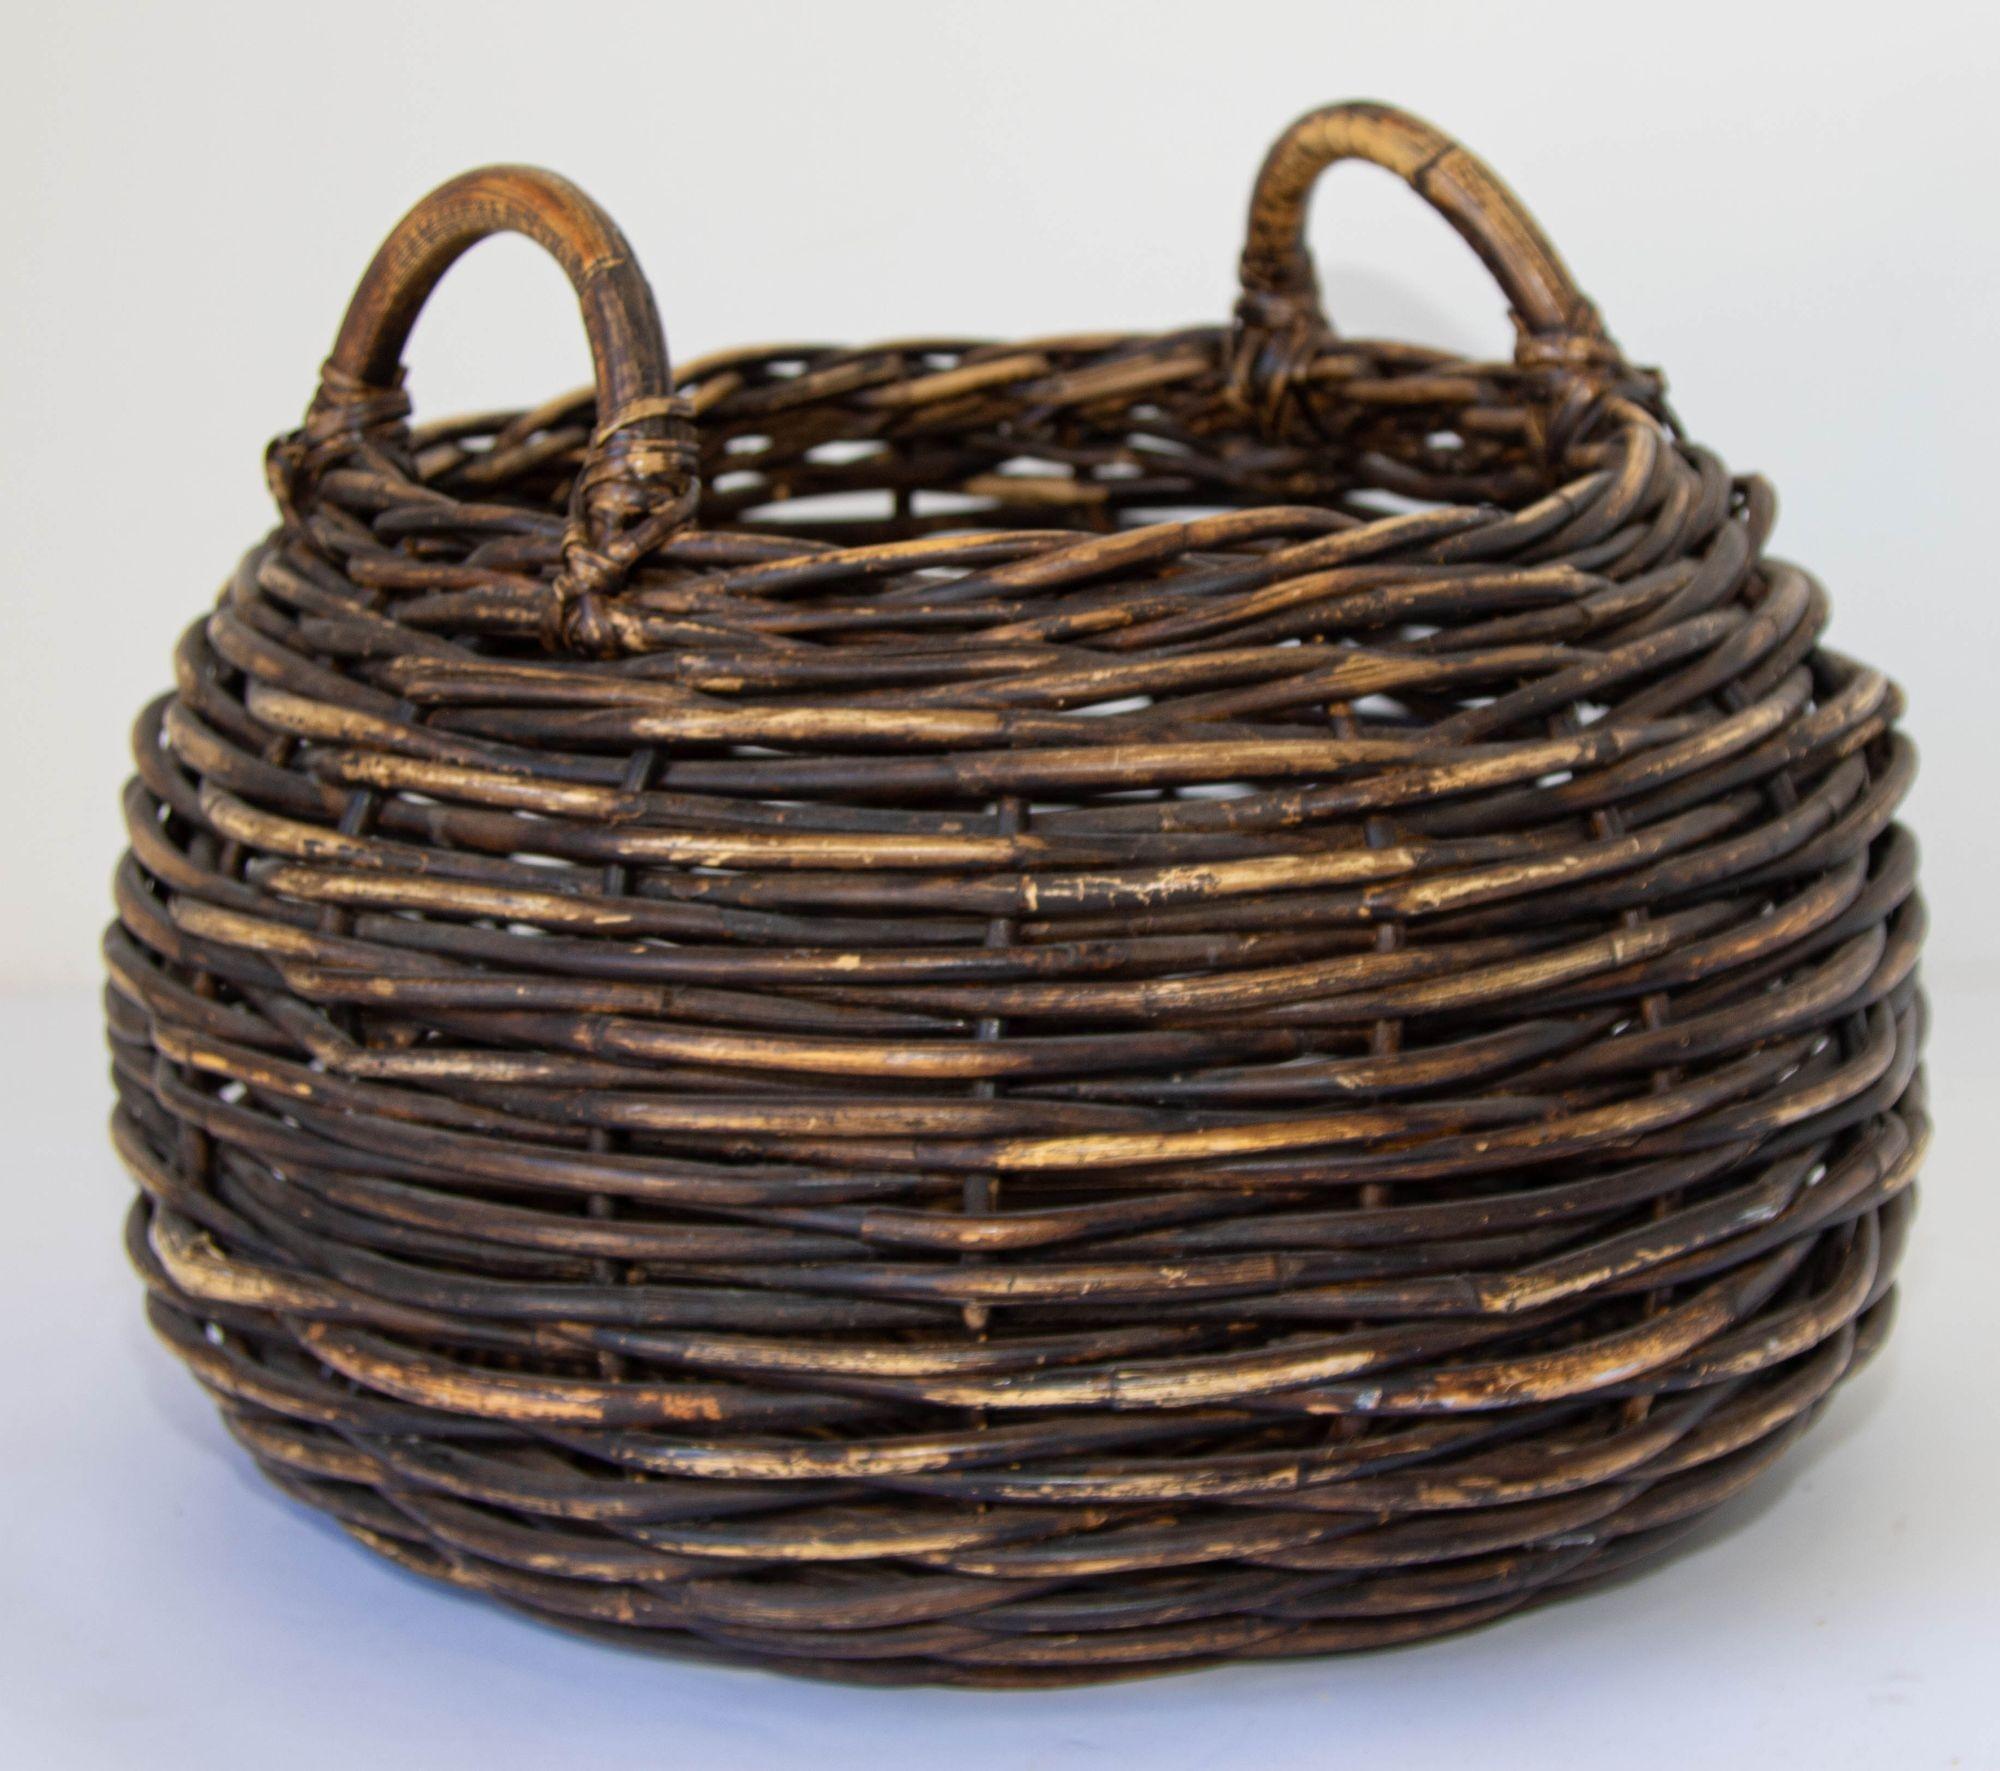 Antique French handwoven wicker grape harvesting basket with wood handles.
Overall very good condition early form and color, early 20th century.
Vintage wicker harvest round shape basket.
This large woven basket features double handles, thicker